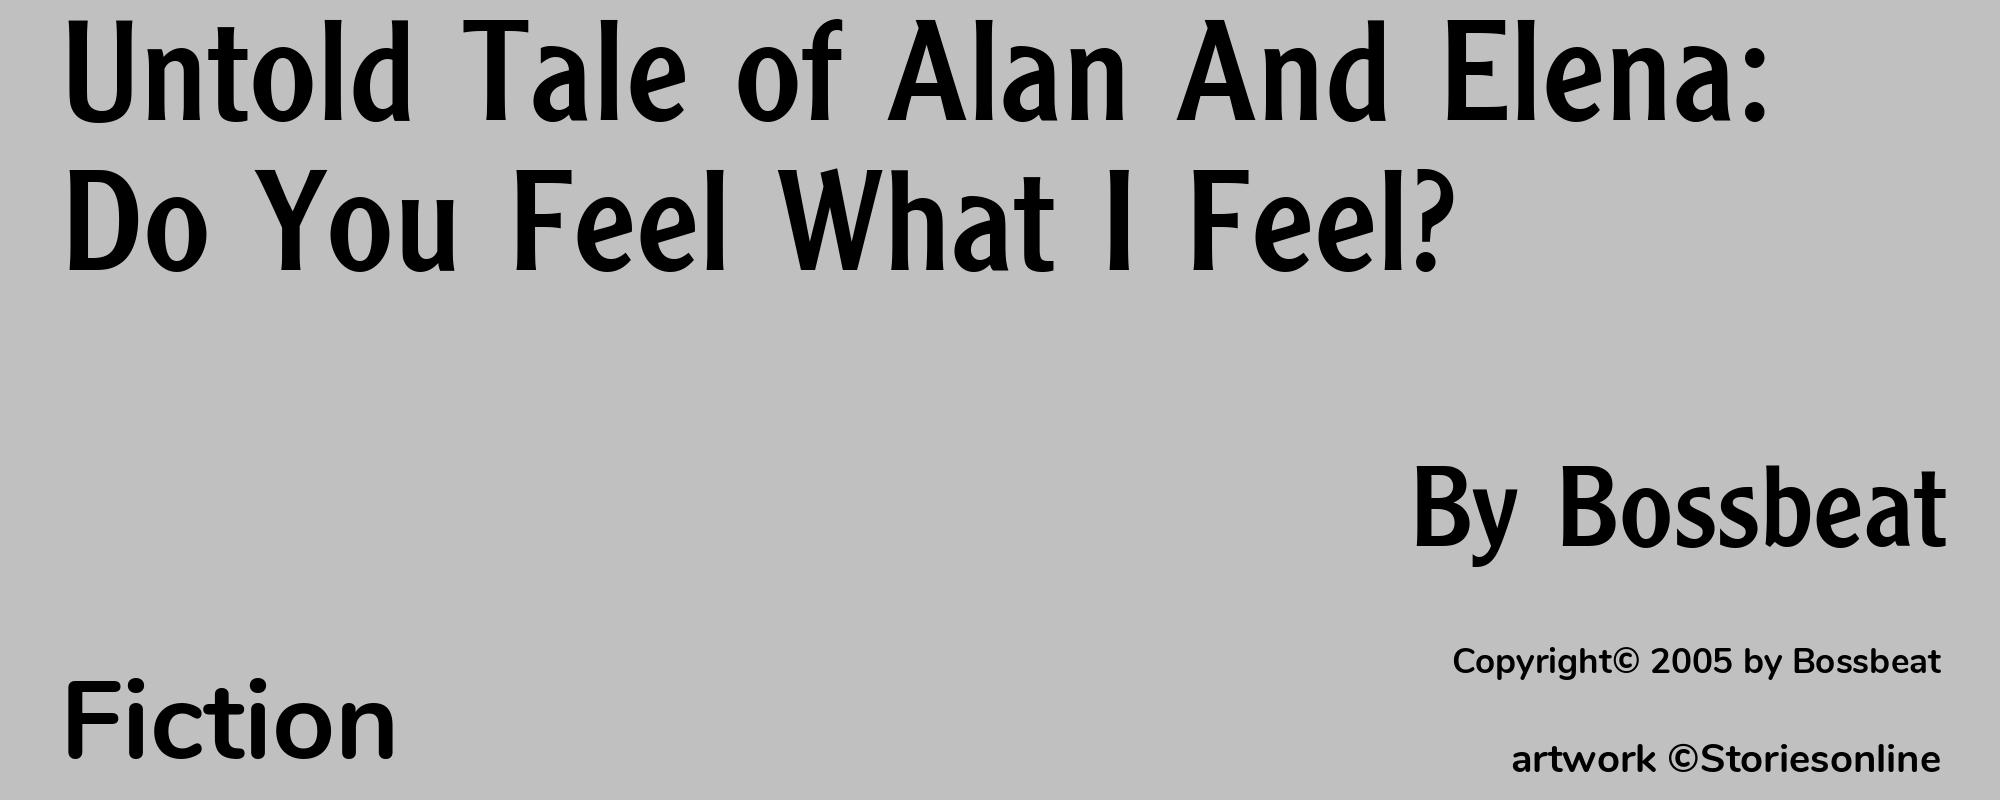 Untold Tale of Alan And Elena: Do You Feel What I Feel? - Cover